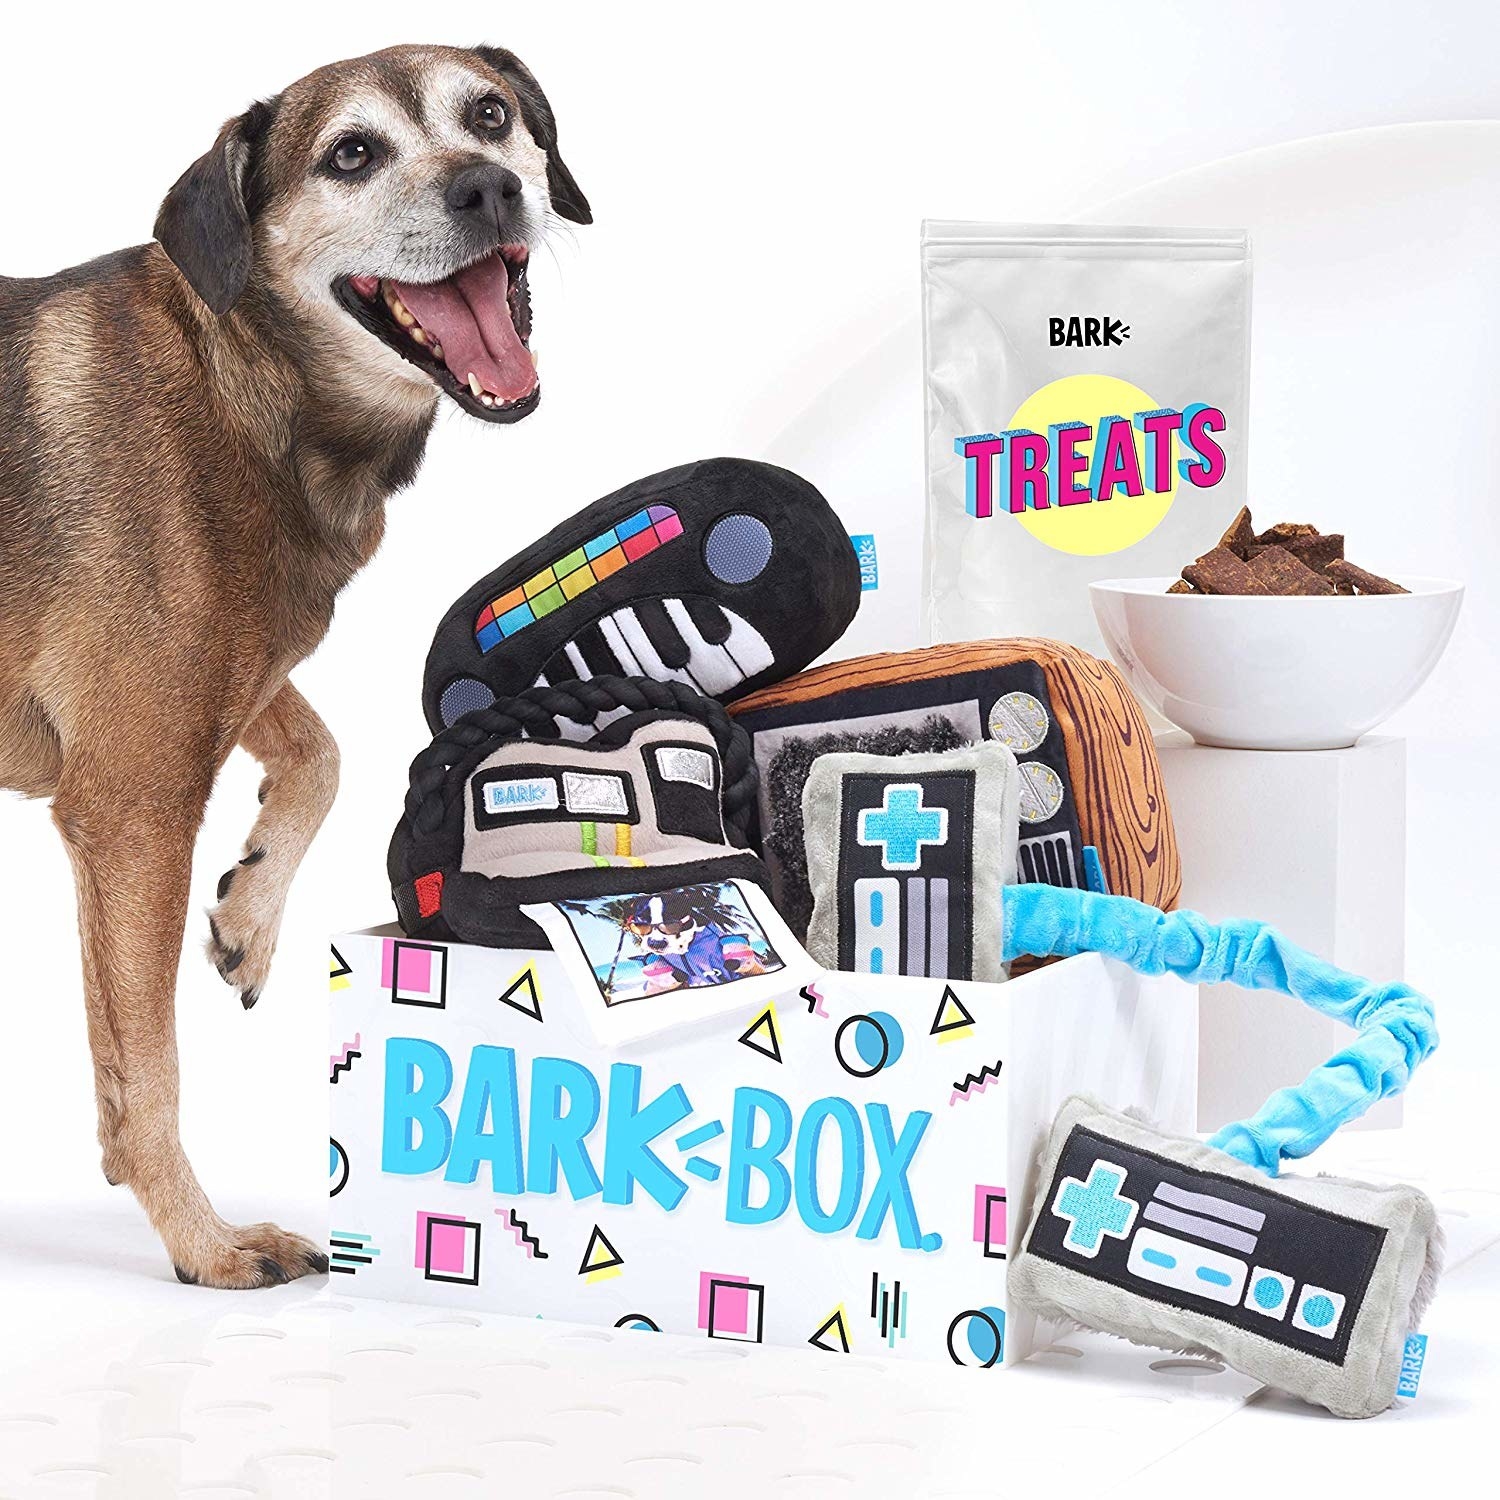 a dog standing next to a bark box filled with 90s-inspired toys